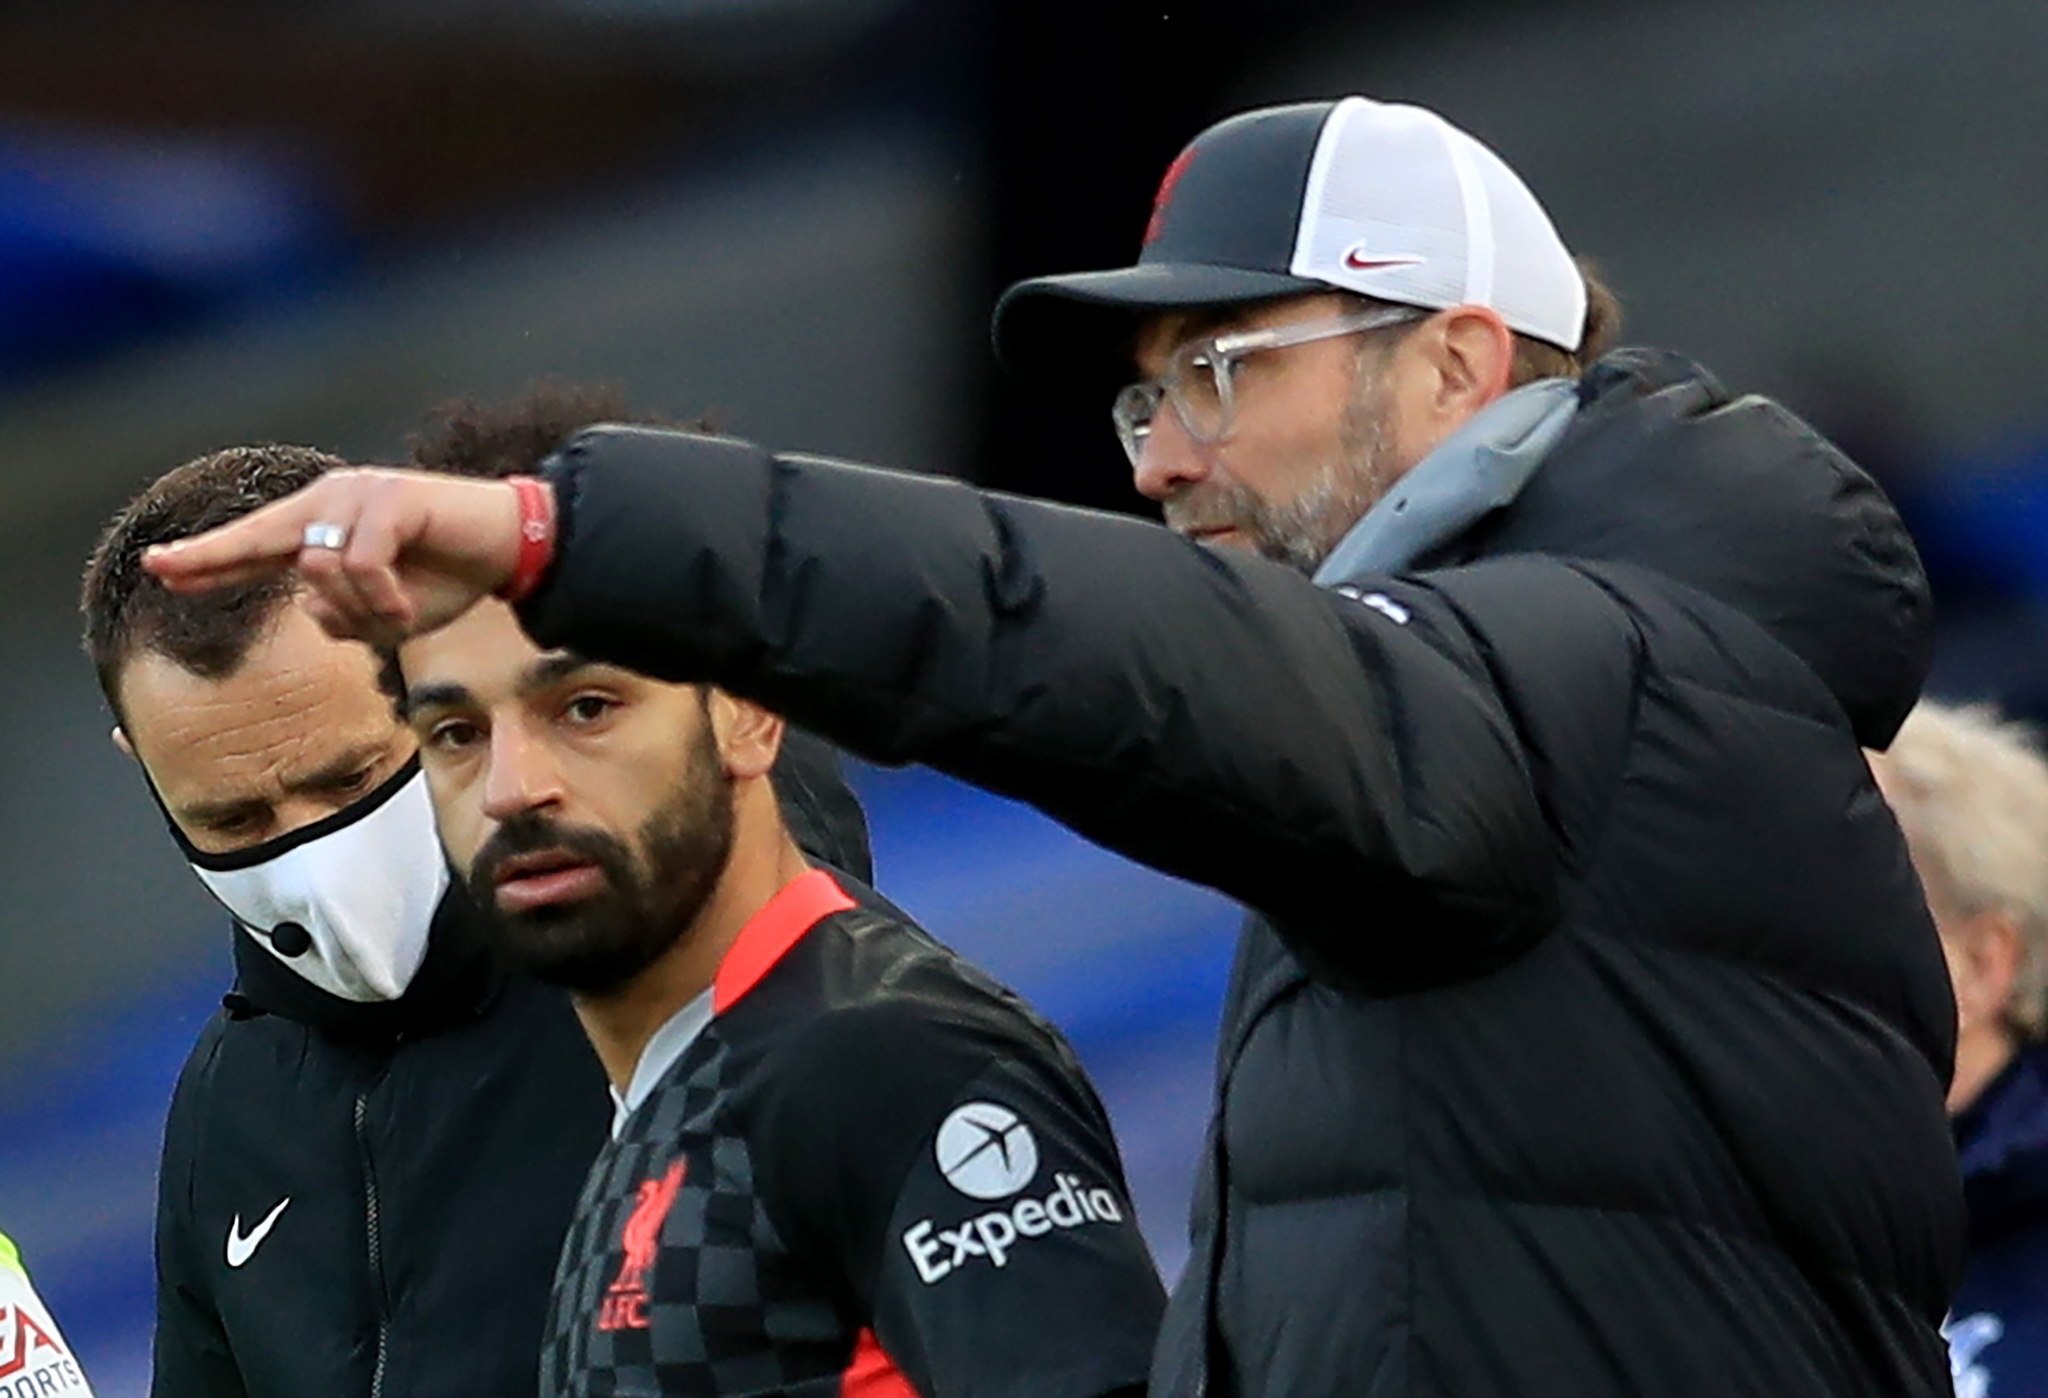 London (United Kingdom), 19/12/2020.- Mohamed lt;HIT gt;Salah lt;/HIT gt; of Liverpool (L) awaits to enter the pitch during the English Premier League soccer match between Crystal Palace and Liverpool FC in London, Britain, 19 December 2020. (Reino Unido, Londres) EFE/EPA/Adam Davy / POOL EDITORIAL USE ONLY. No use with unauthorized audio, video, data, fixture lists, club/league logos or 'live' services. Online in-match use limited to 120 images, no video emulation. No use in betting, games or single club/league/player publications